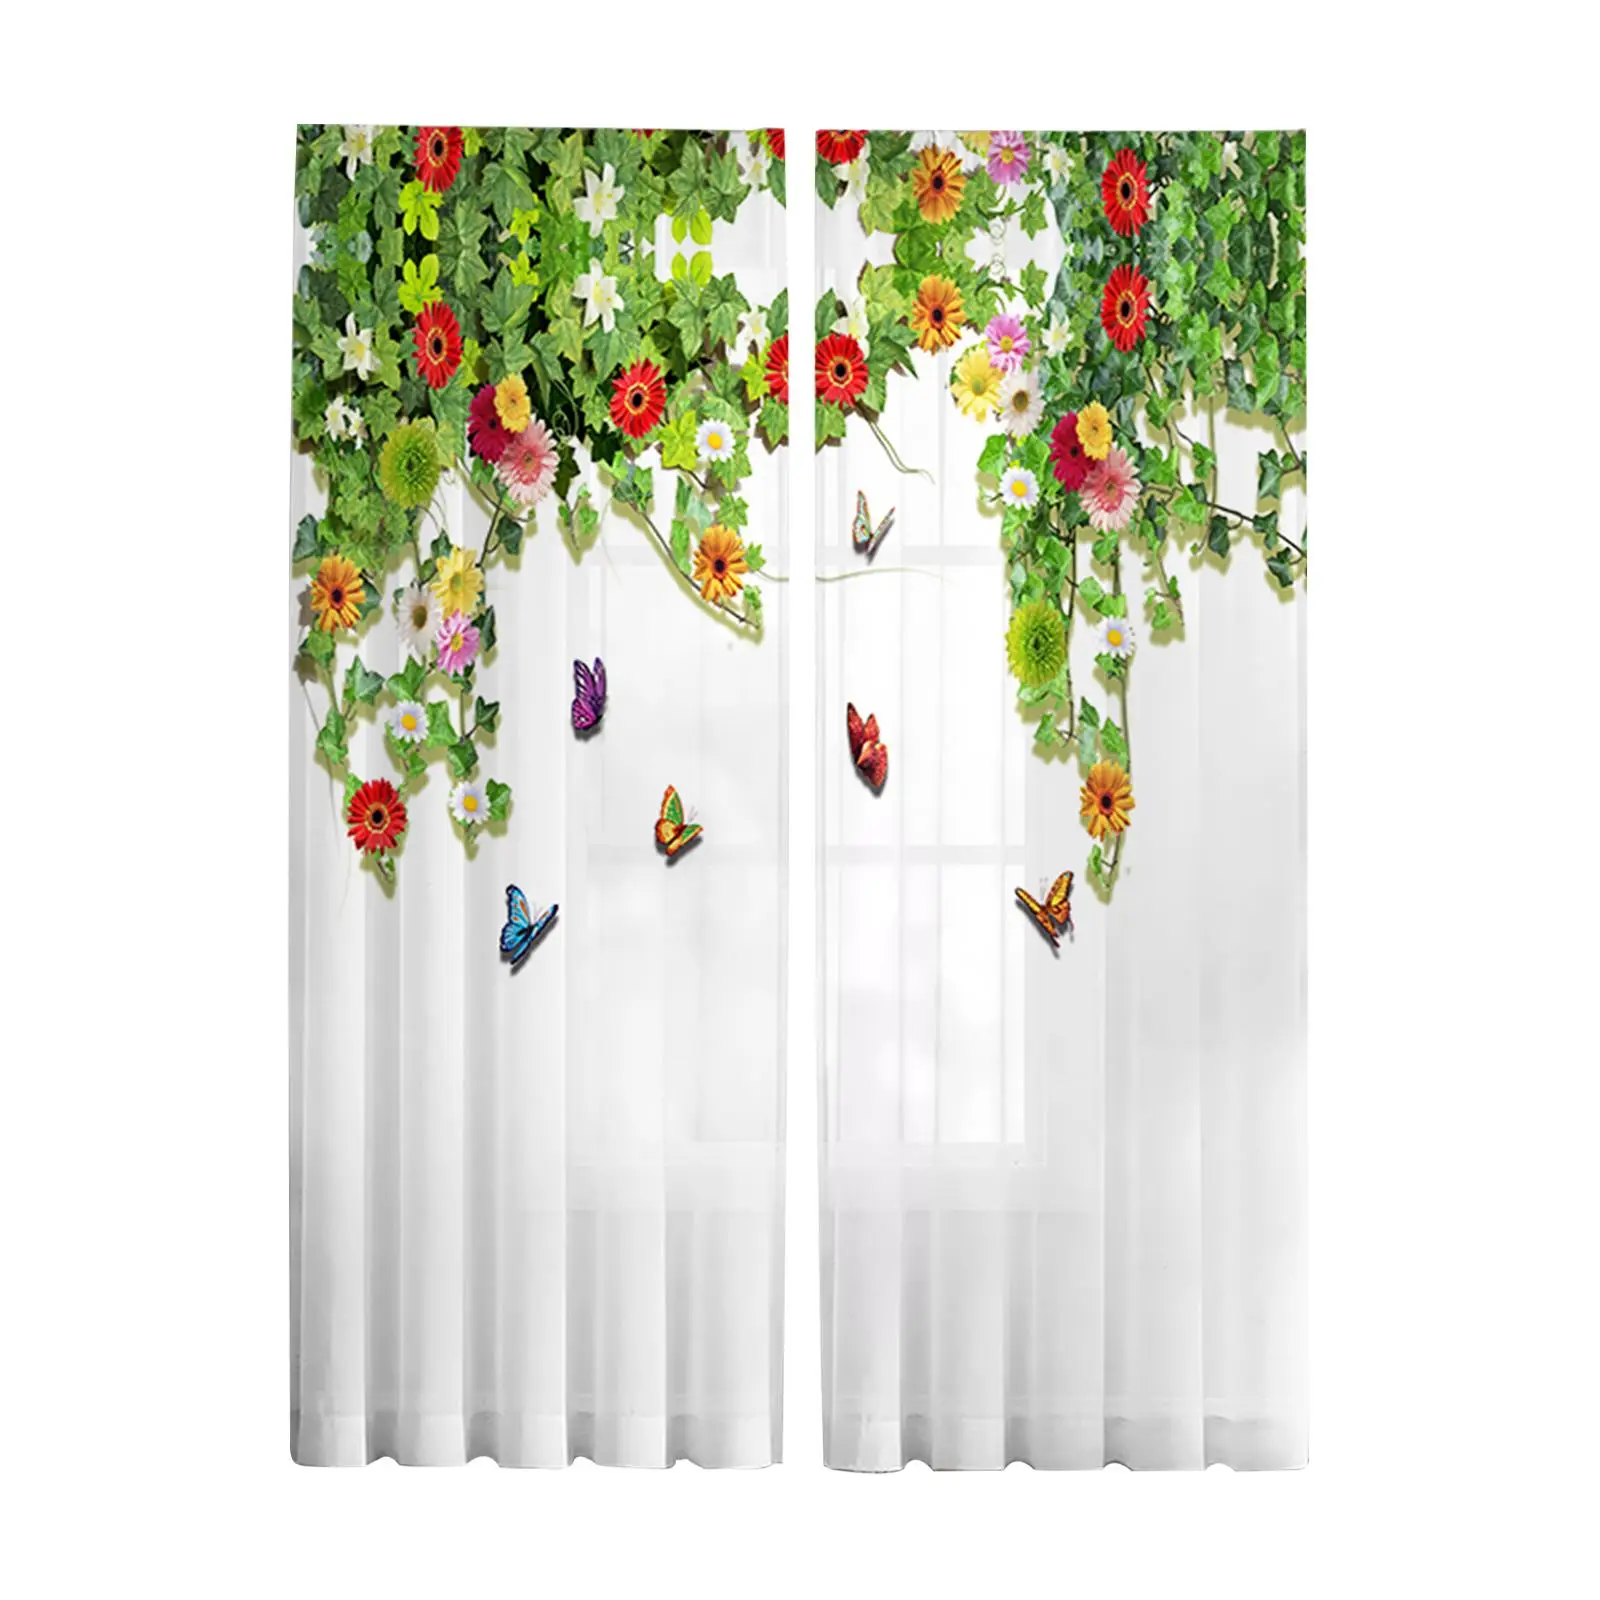 Rustic Window Curtains Door Curtain for Dining Room Living Room Decoration